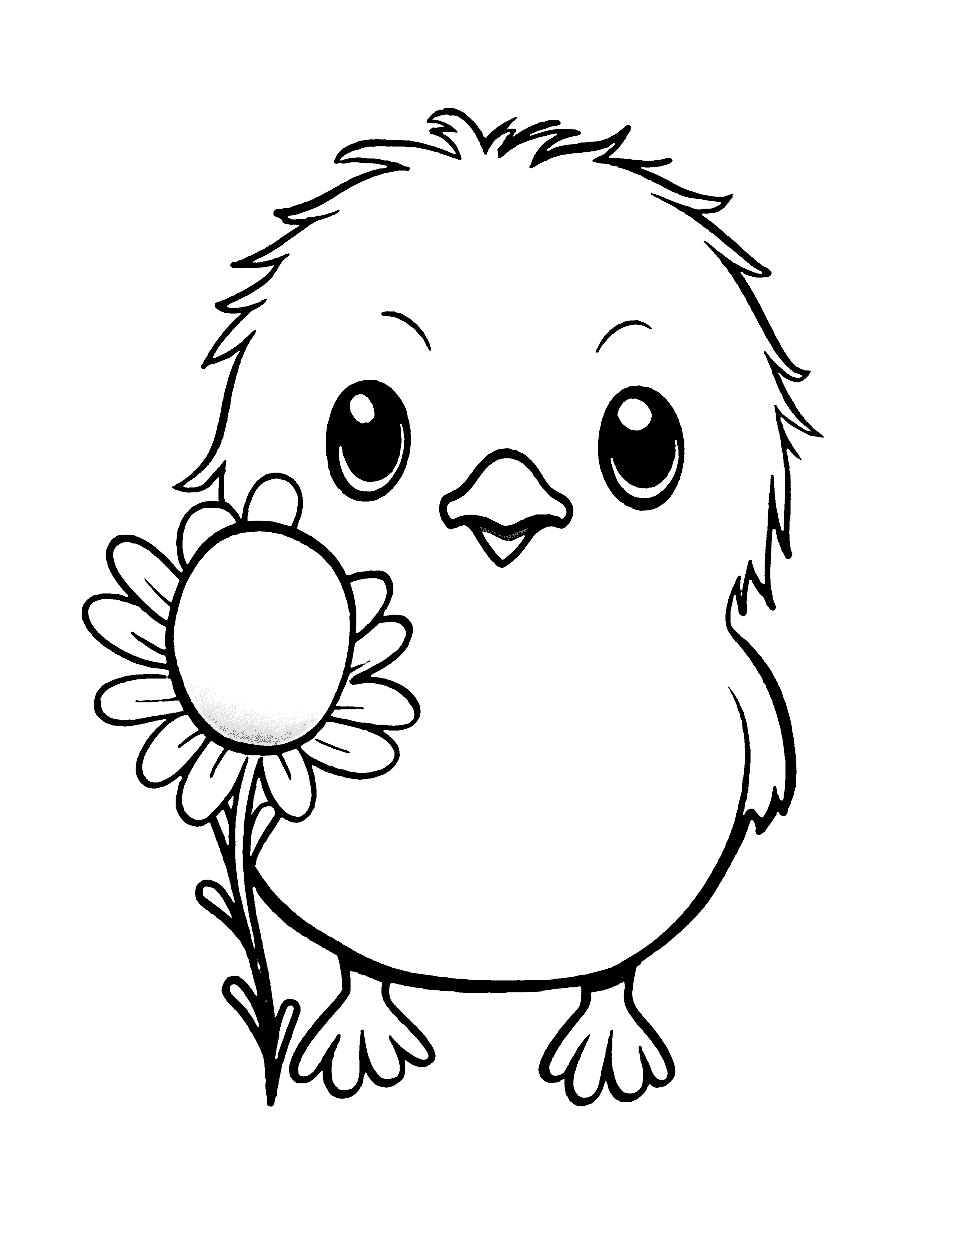 Cute Chick with Flower Easter Coloring Page - A tiny chick holding a beautiful flower, radiating happiness and Easter spirit.